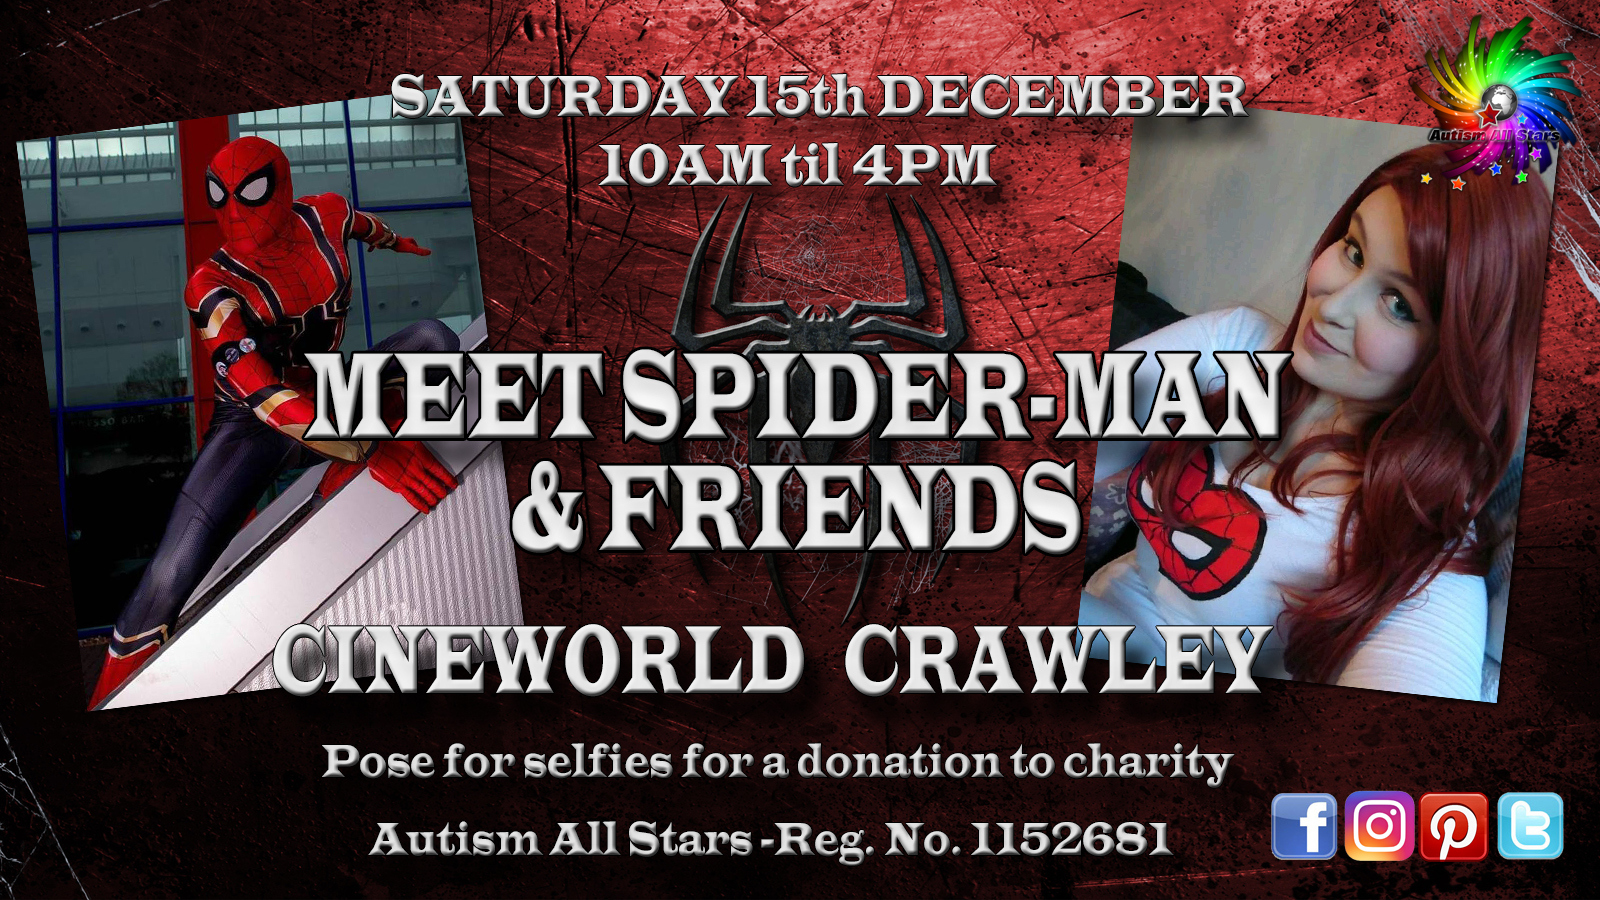 Aspergers, autism, Autism All Stars, autism awareness, characters, charity, cinema, Cineworld, cosplay, diversity, events, sussex, crawley, west sussex, Spider-Man